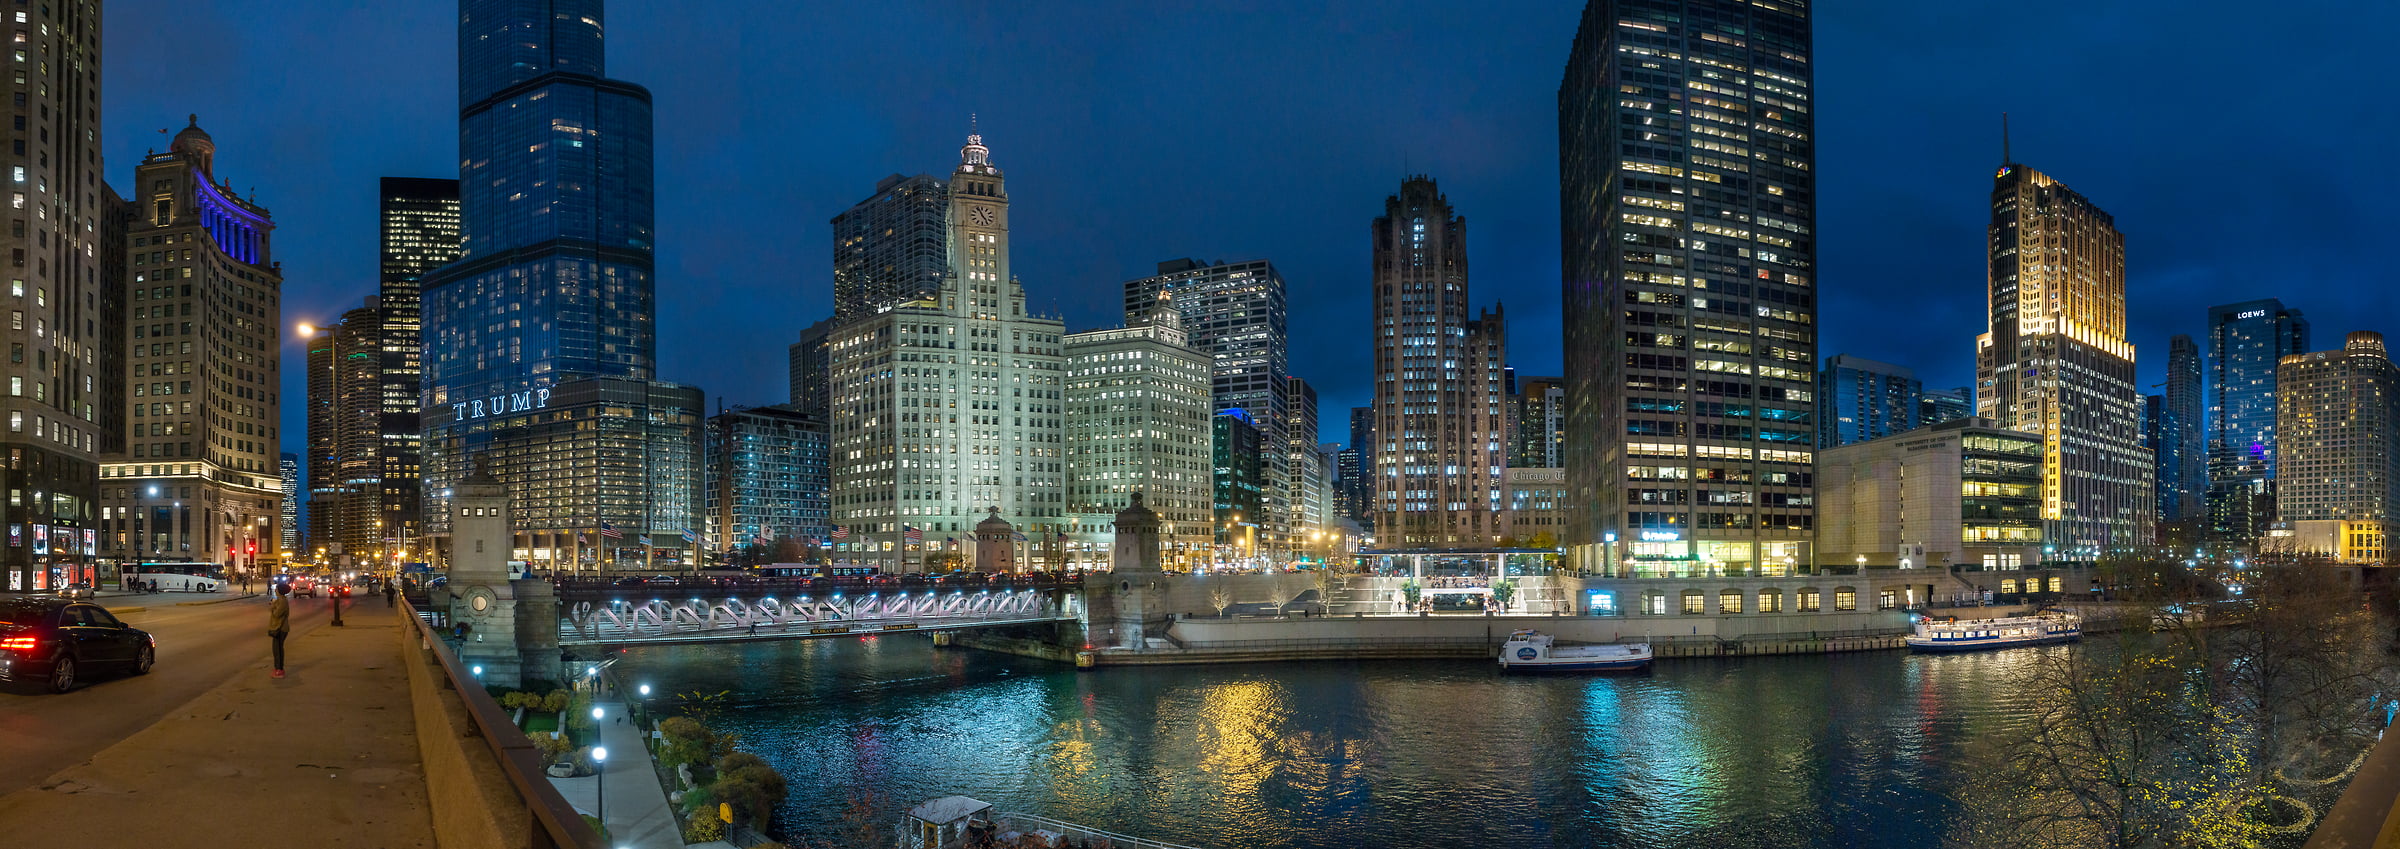 242 megapixels! A very high resolution, large-format VAST photo print of the Chicago River at night with the Chicago skyline; cityscape photograph created by Peter Rodger in Chicago River, Michigan Avenue, Chicago